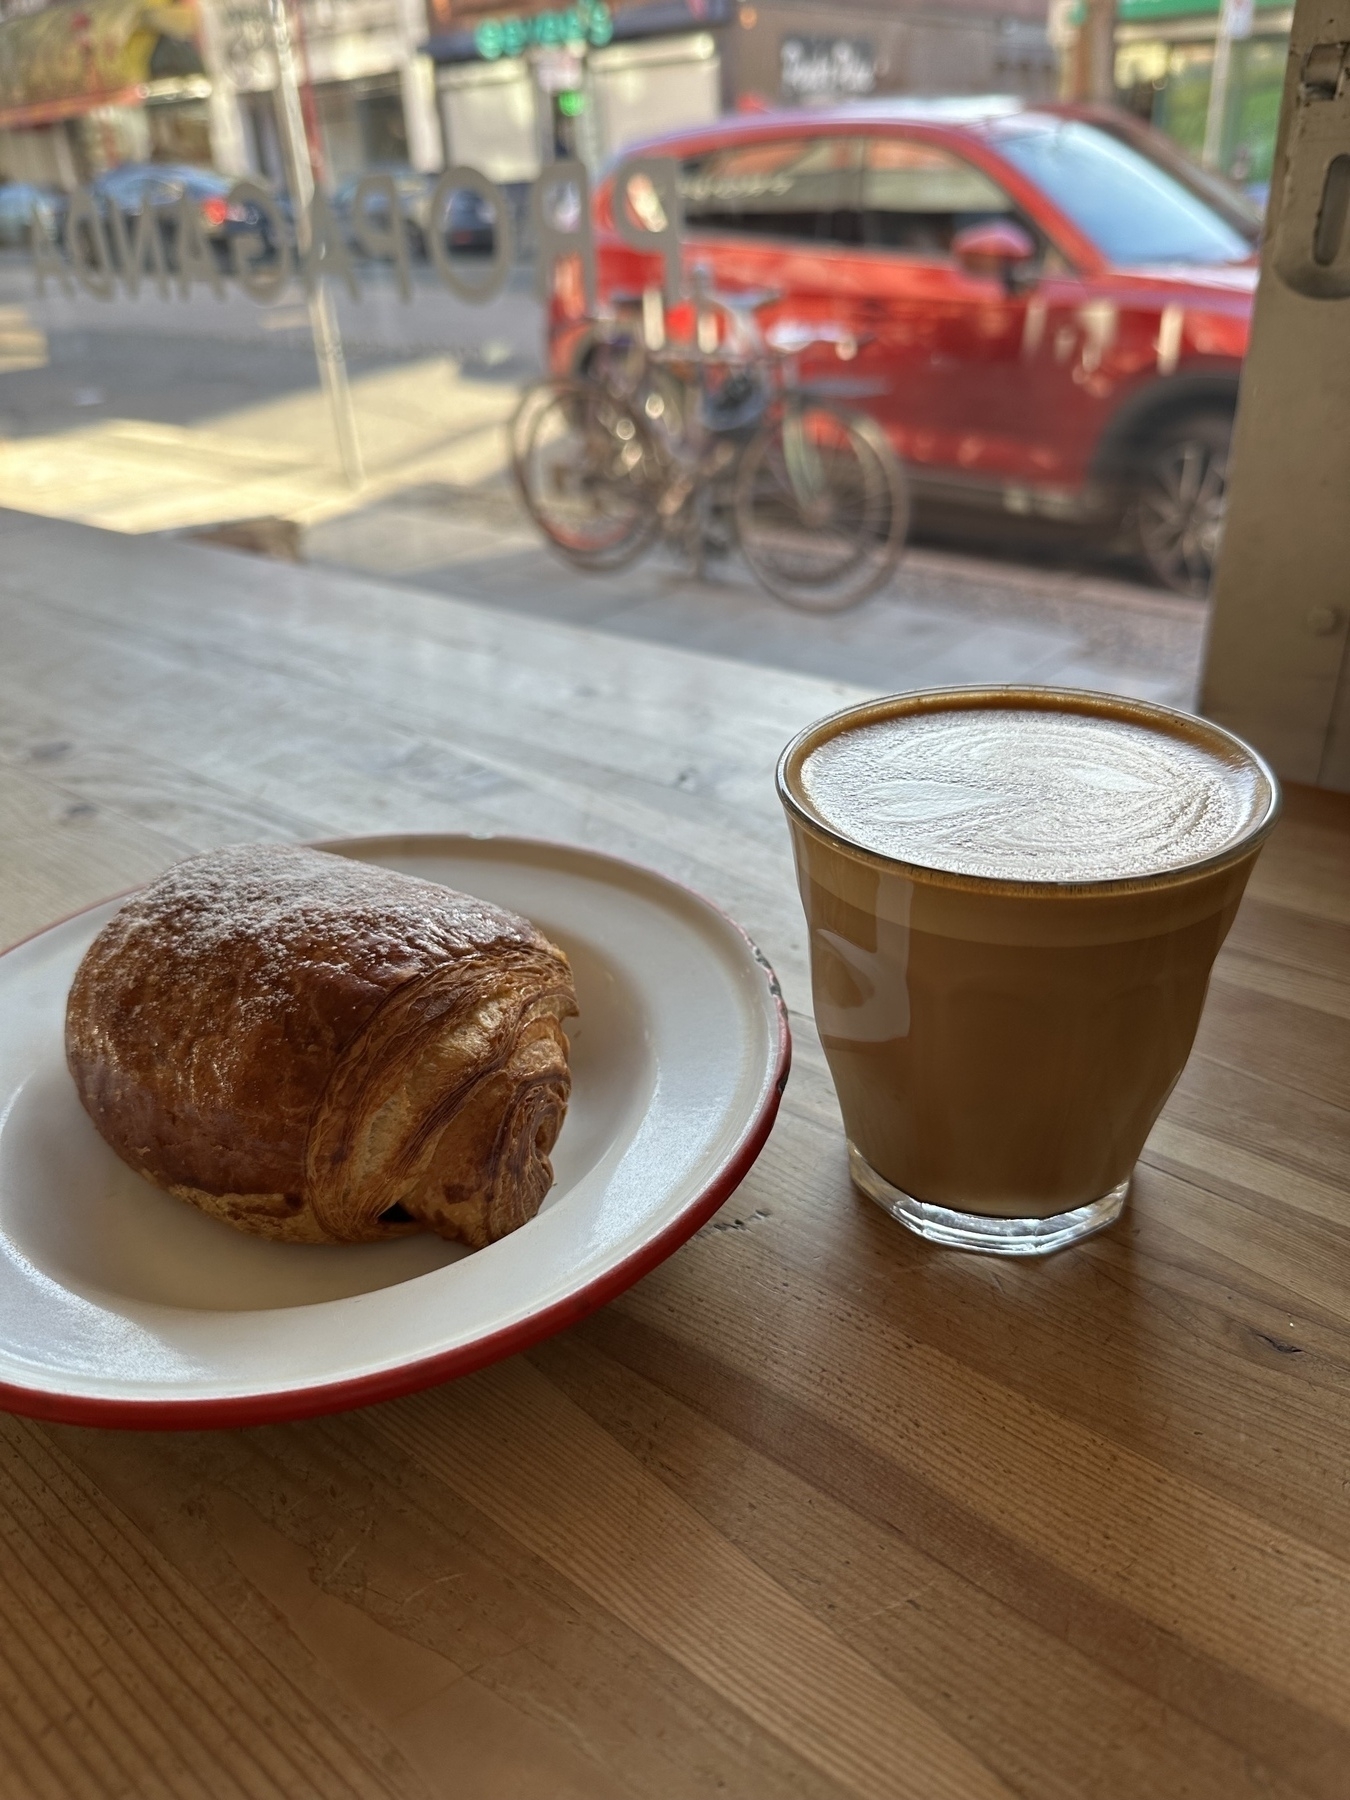 Coffee and chocolate croissant.